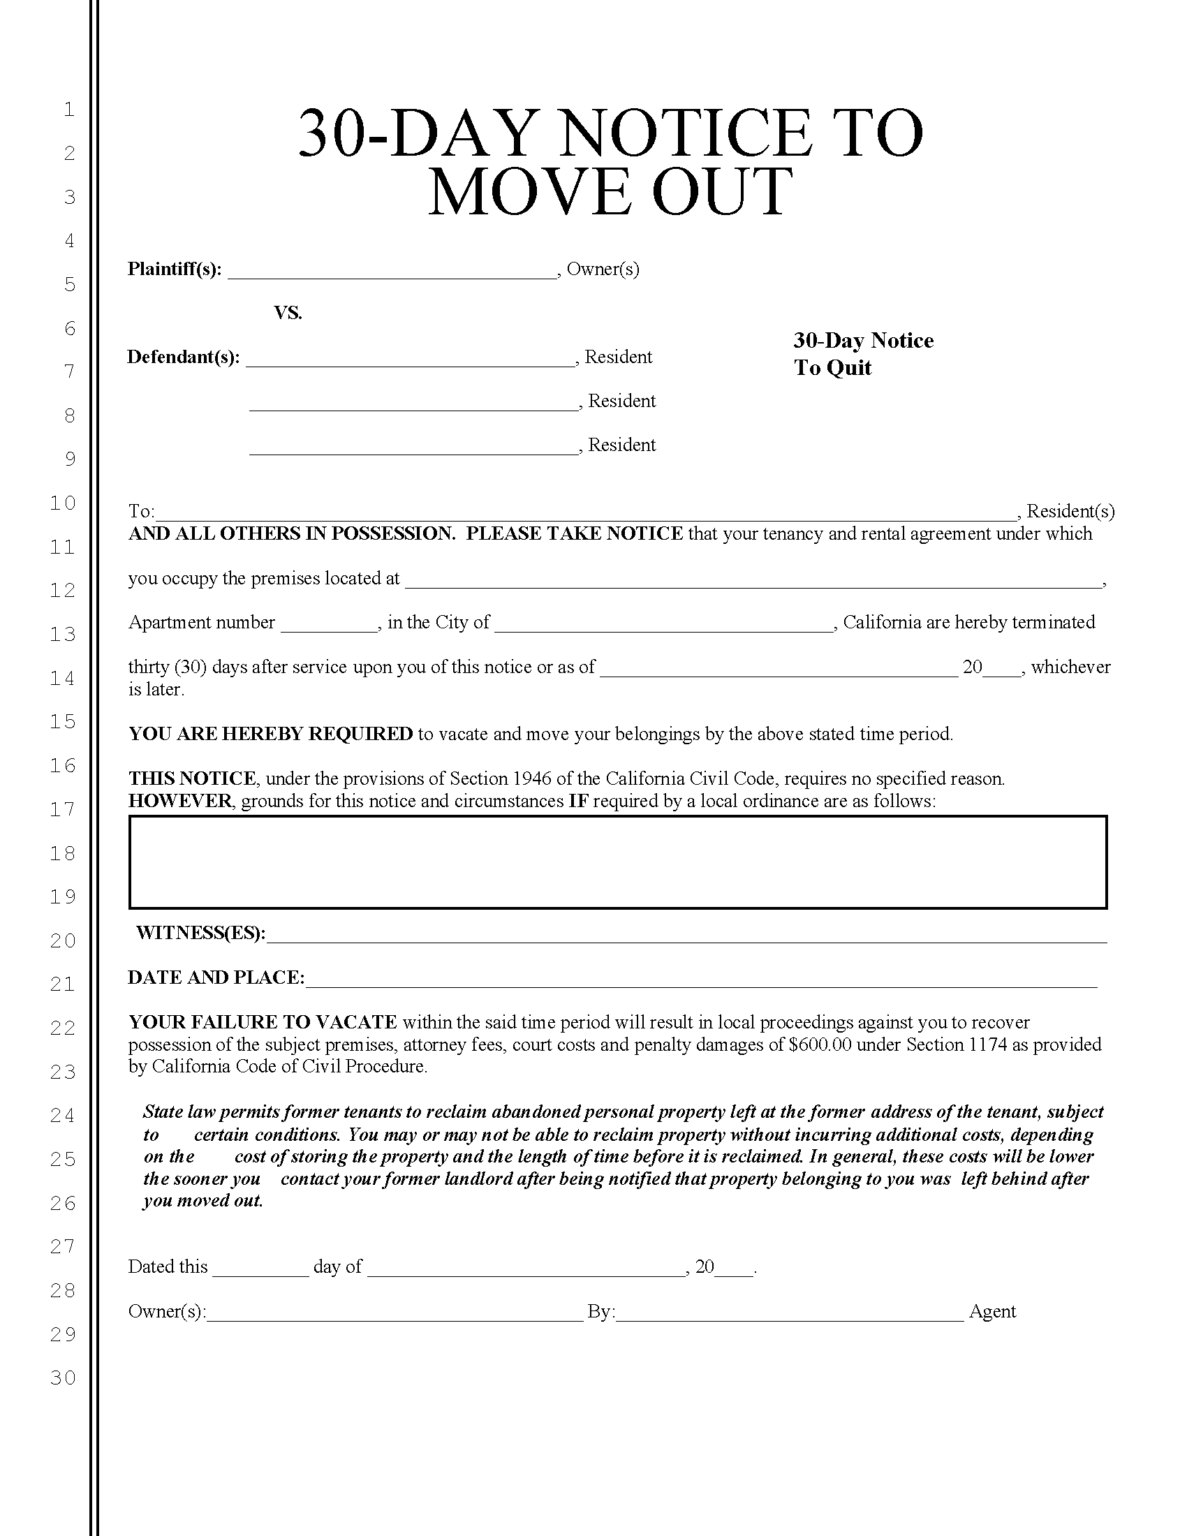 free-printable-30-day-notice-to-vacate